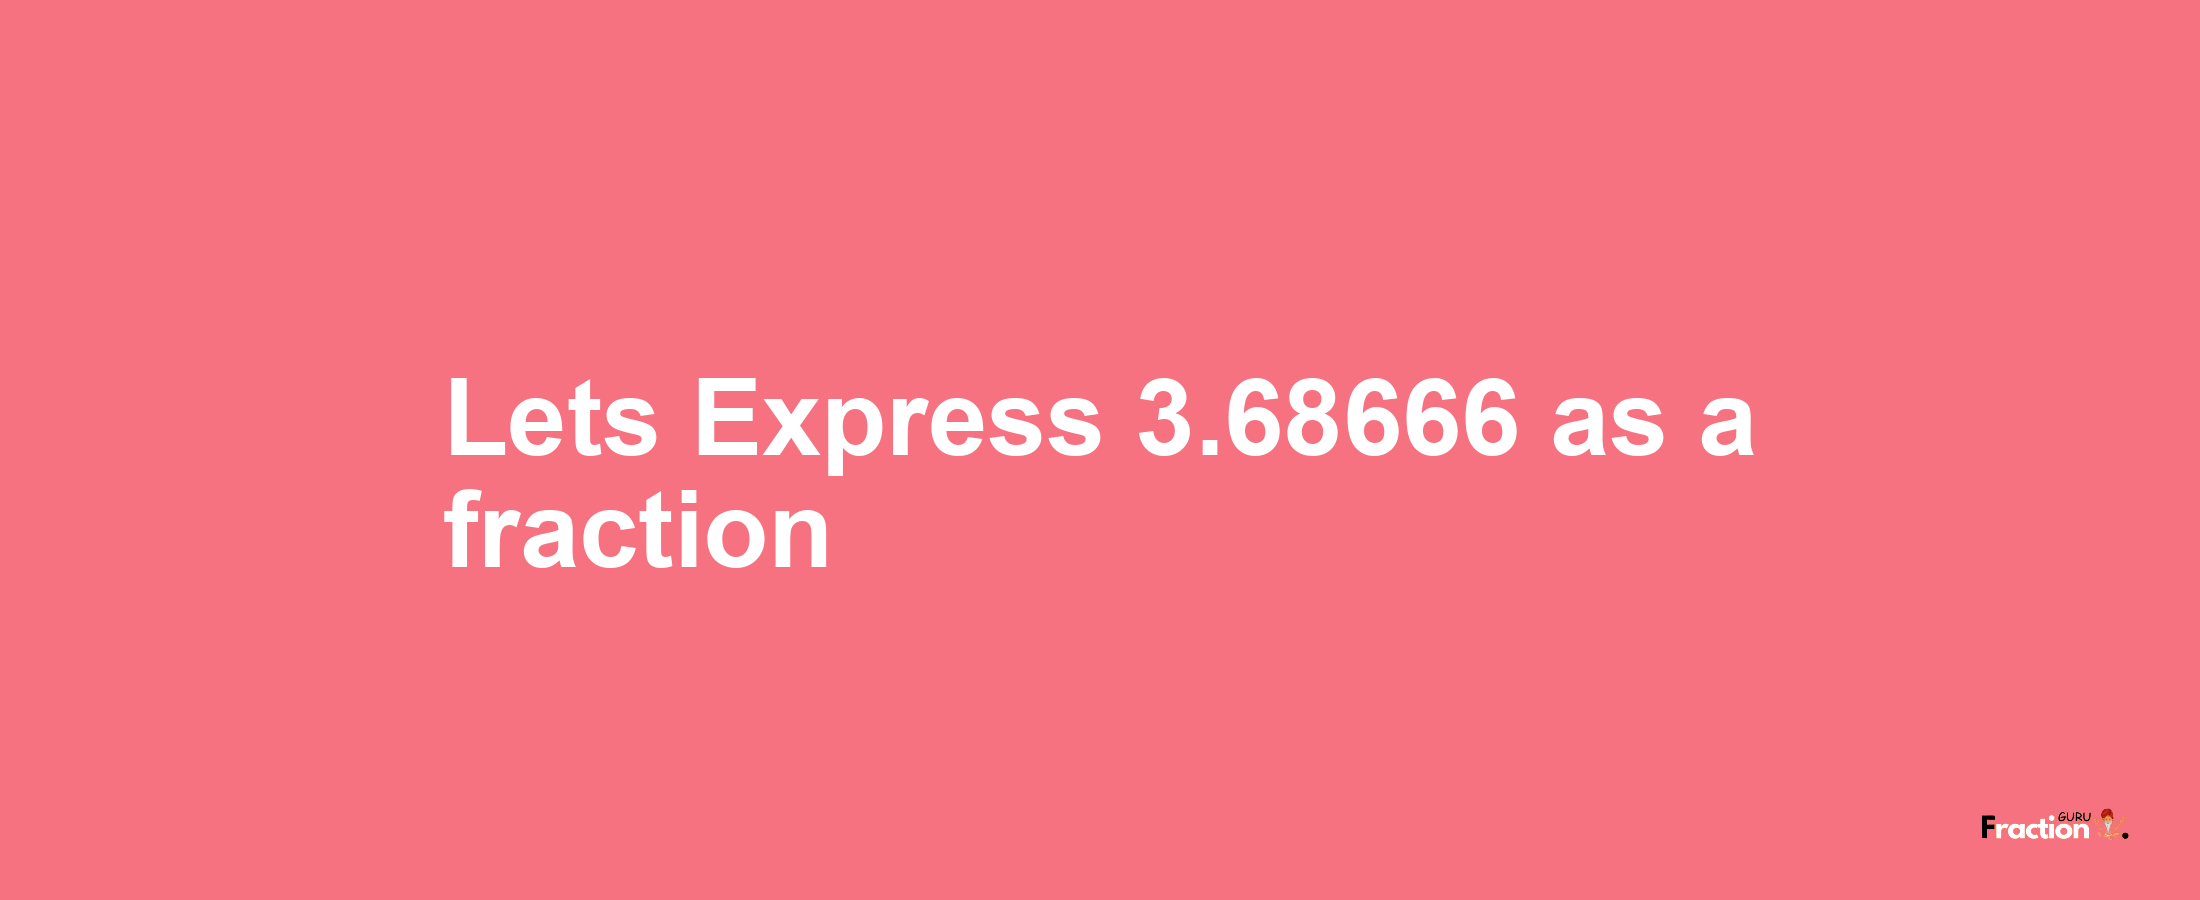 Lets Express 3.68666 as afraction